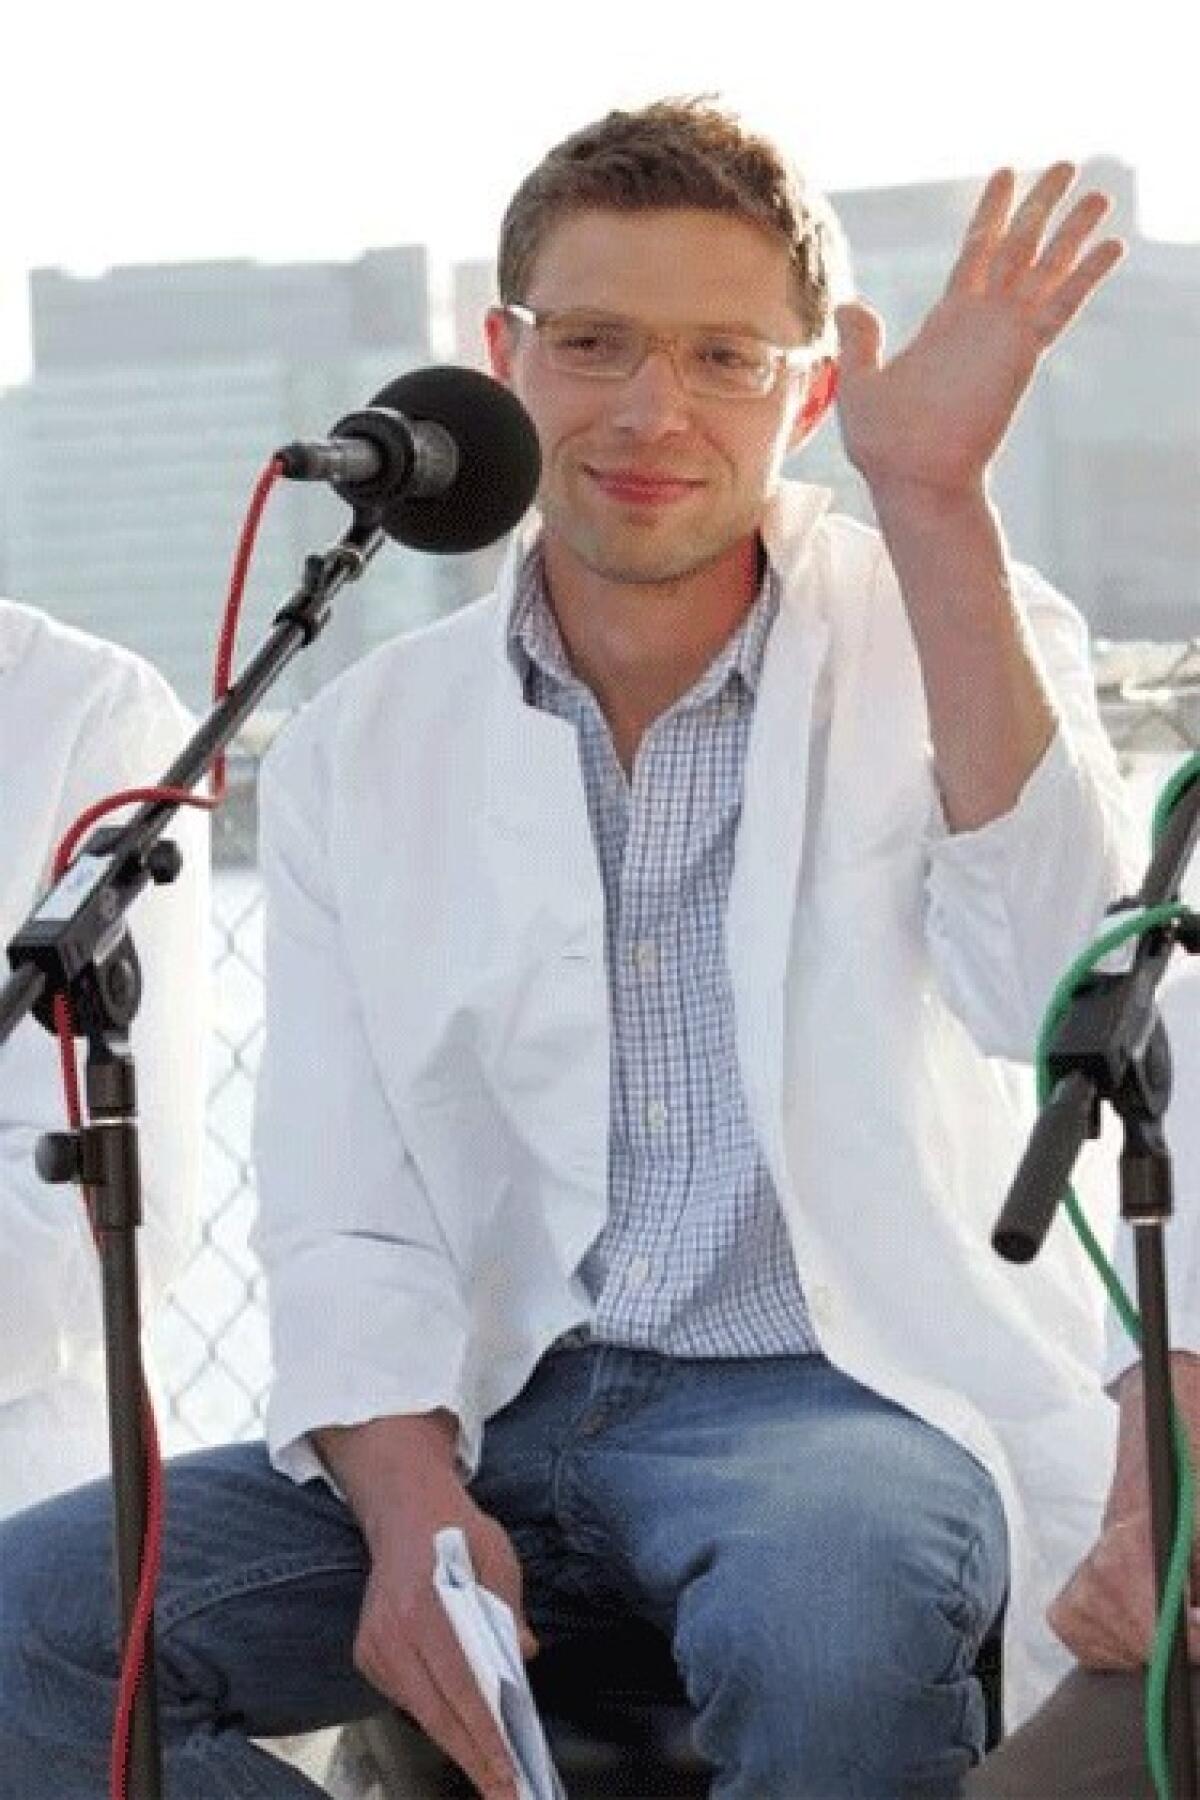 On Monday Jonah Lehrer admitted to fabrications and "improper combinations" of quotes in his latest book, "Imagine: How Creativity Works." Above: Lehrer is seen at the "You and Your Irrational Brain" panel discussion on May 29, 2008 in New York.